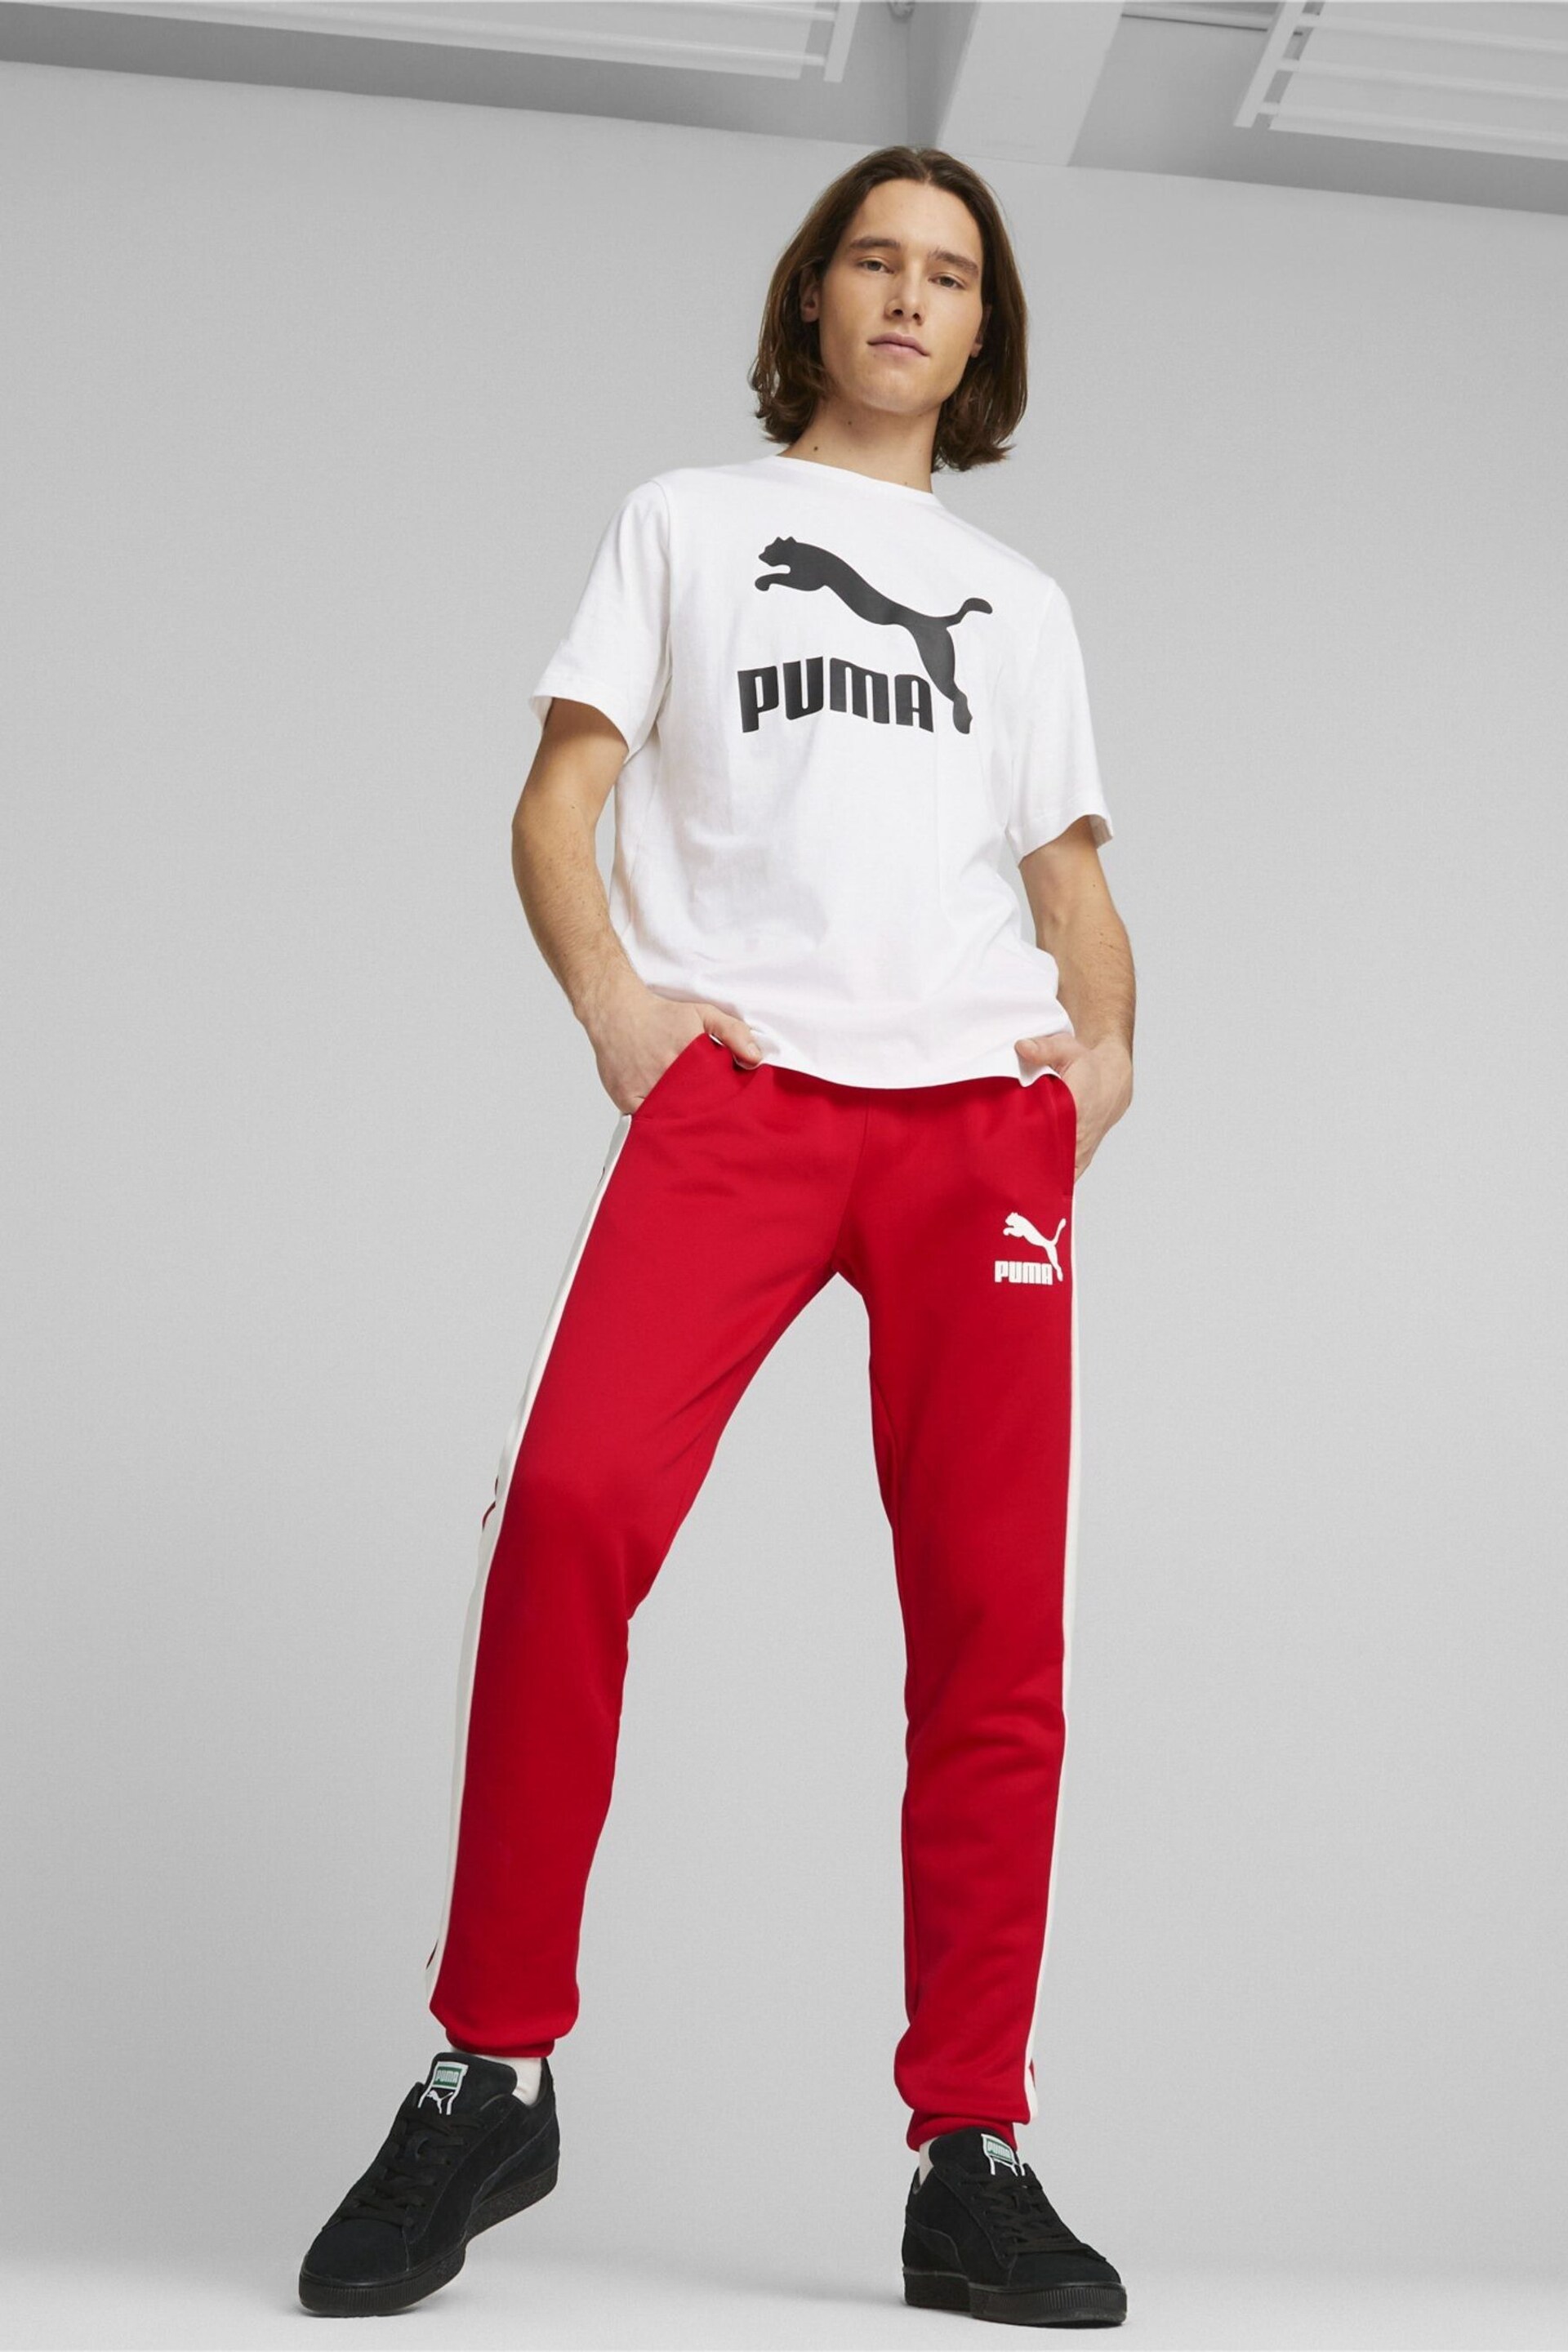 Puma Red Iconic T7 Men's Track Joggers - Image 3 of 7